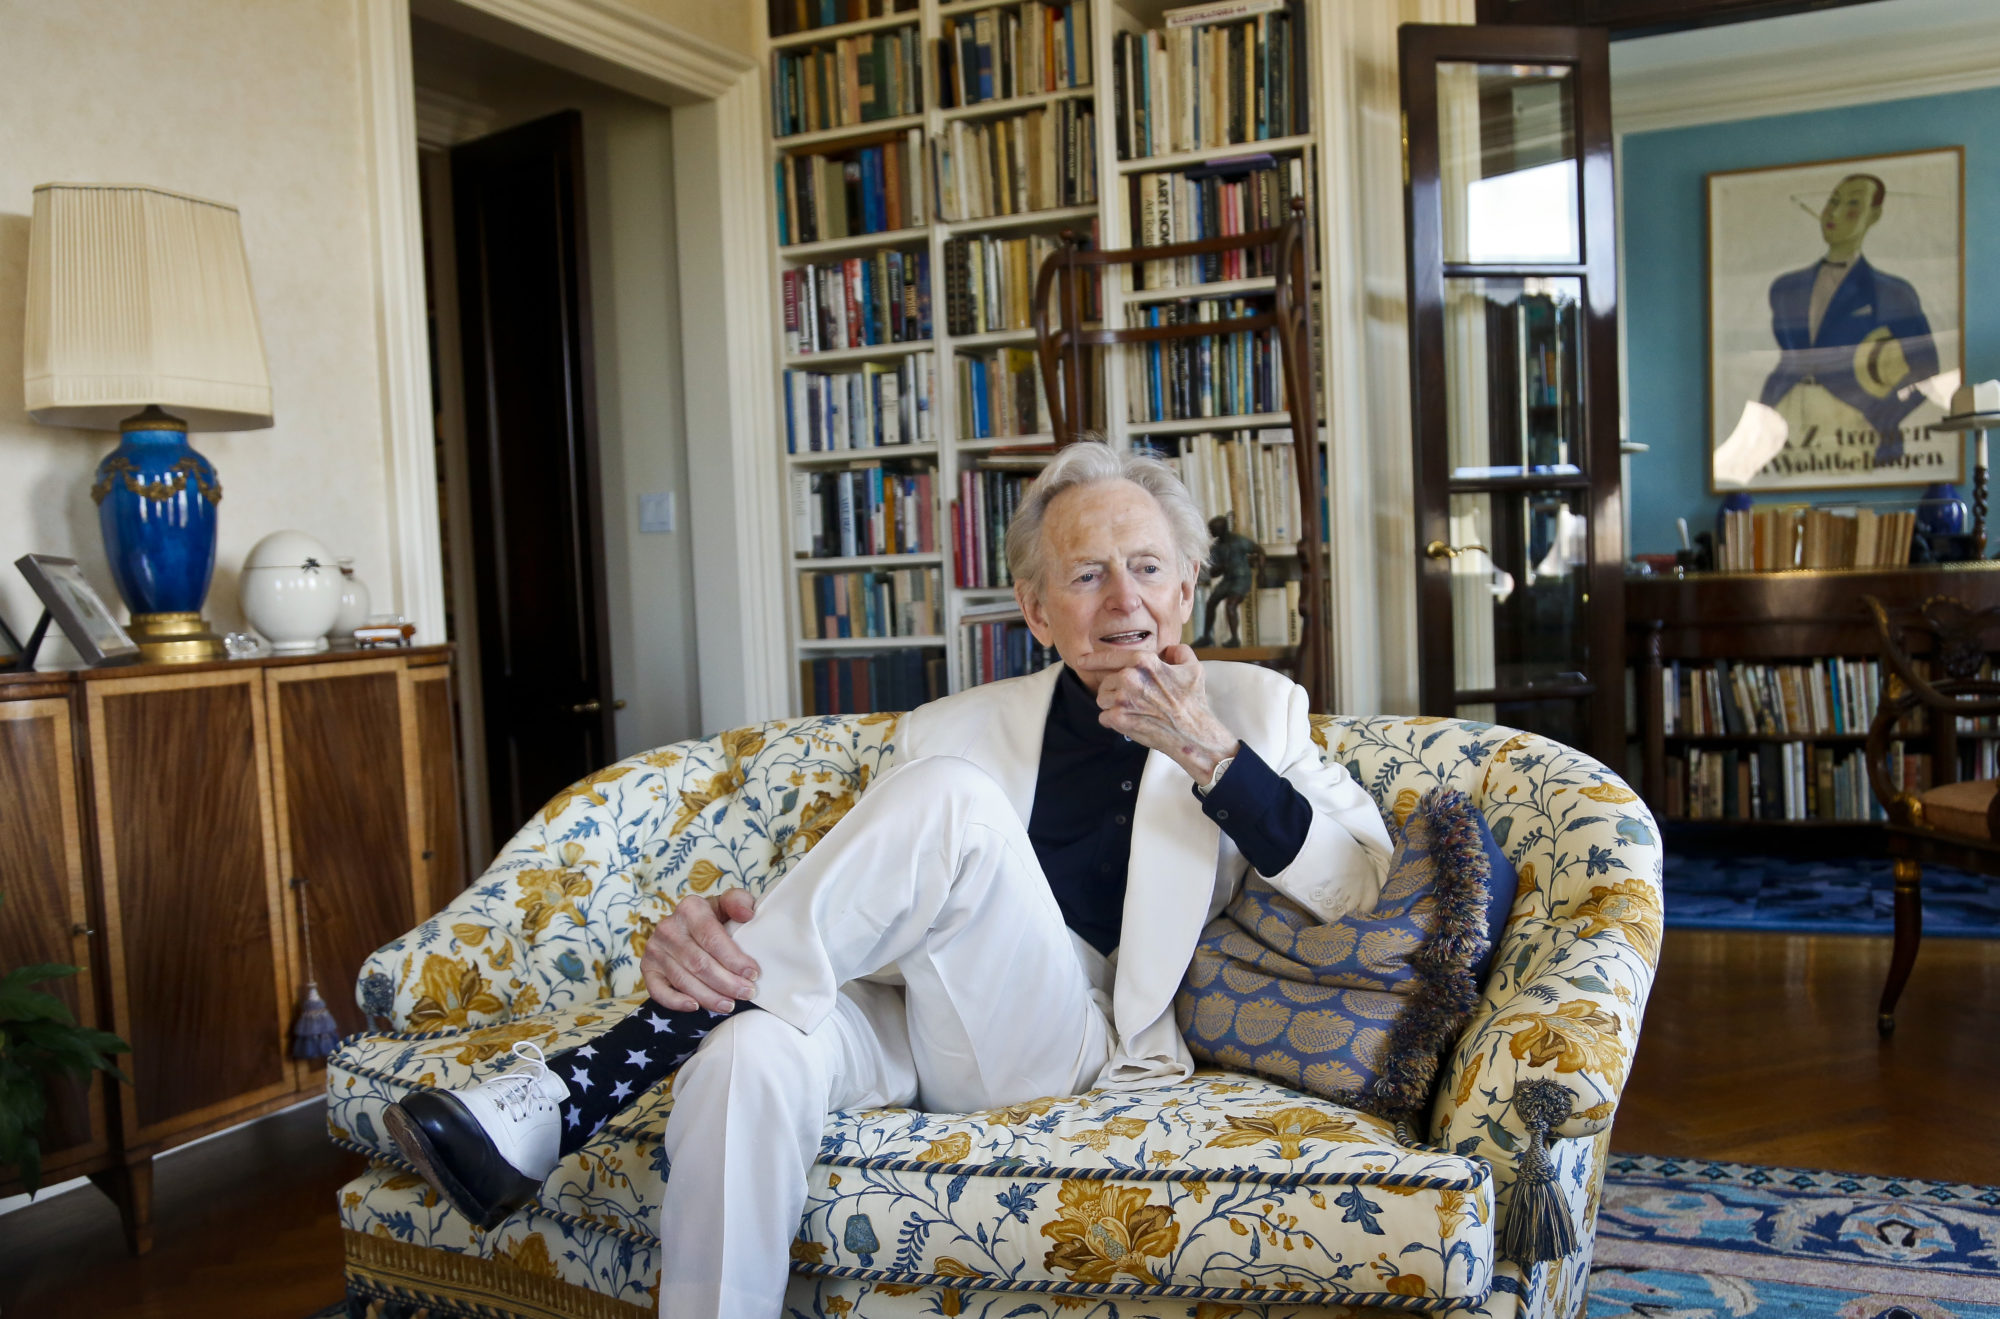 Author and journalist Tom Wolfe at home 
in New York City
in 2016